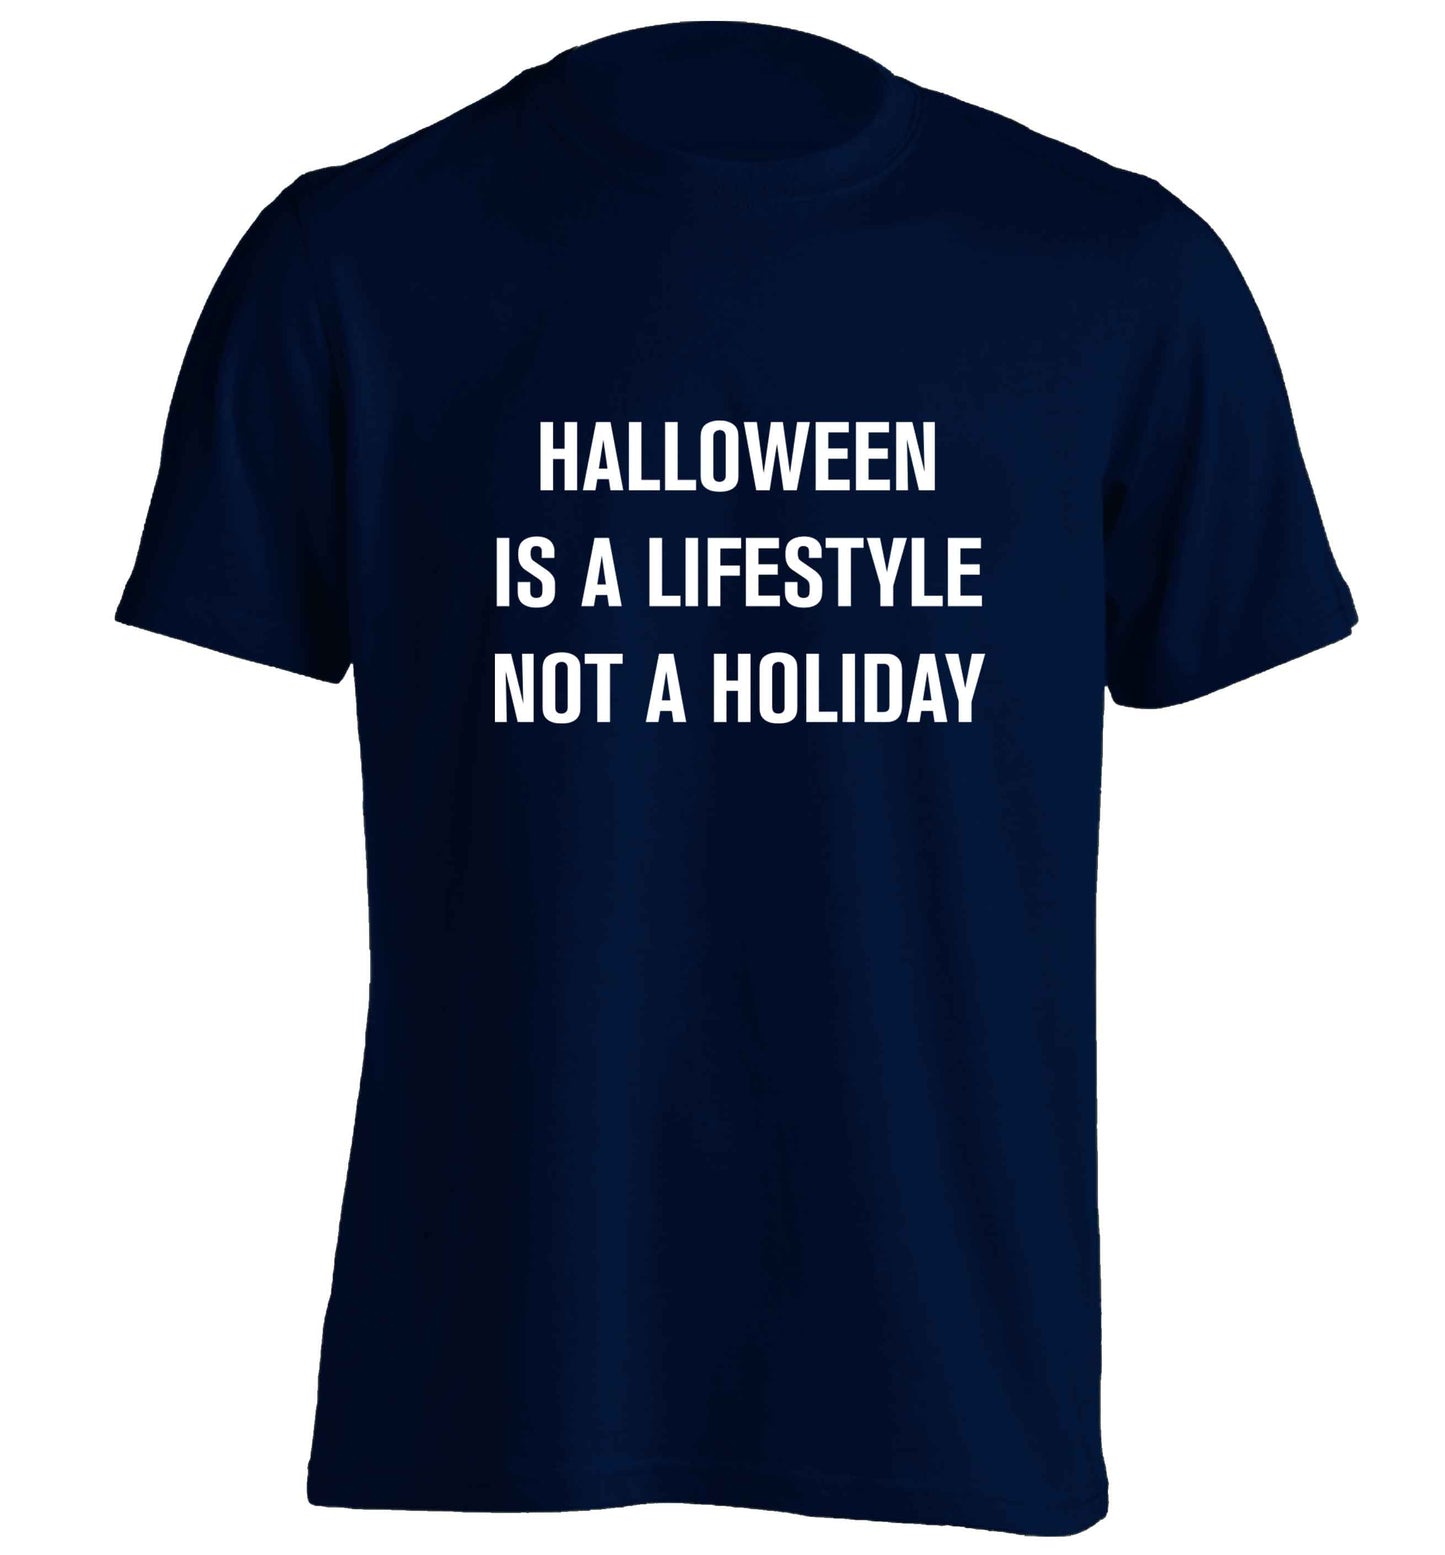 Halloween is a lifestyle not a holiday adults unisex navy Tshirt 2XL